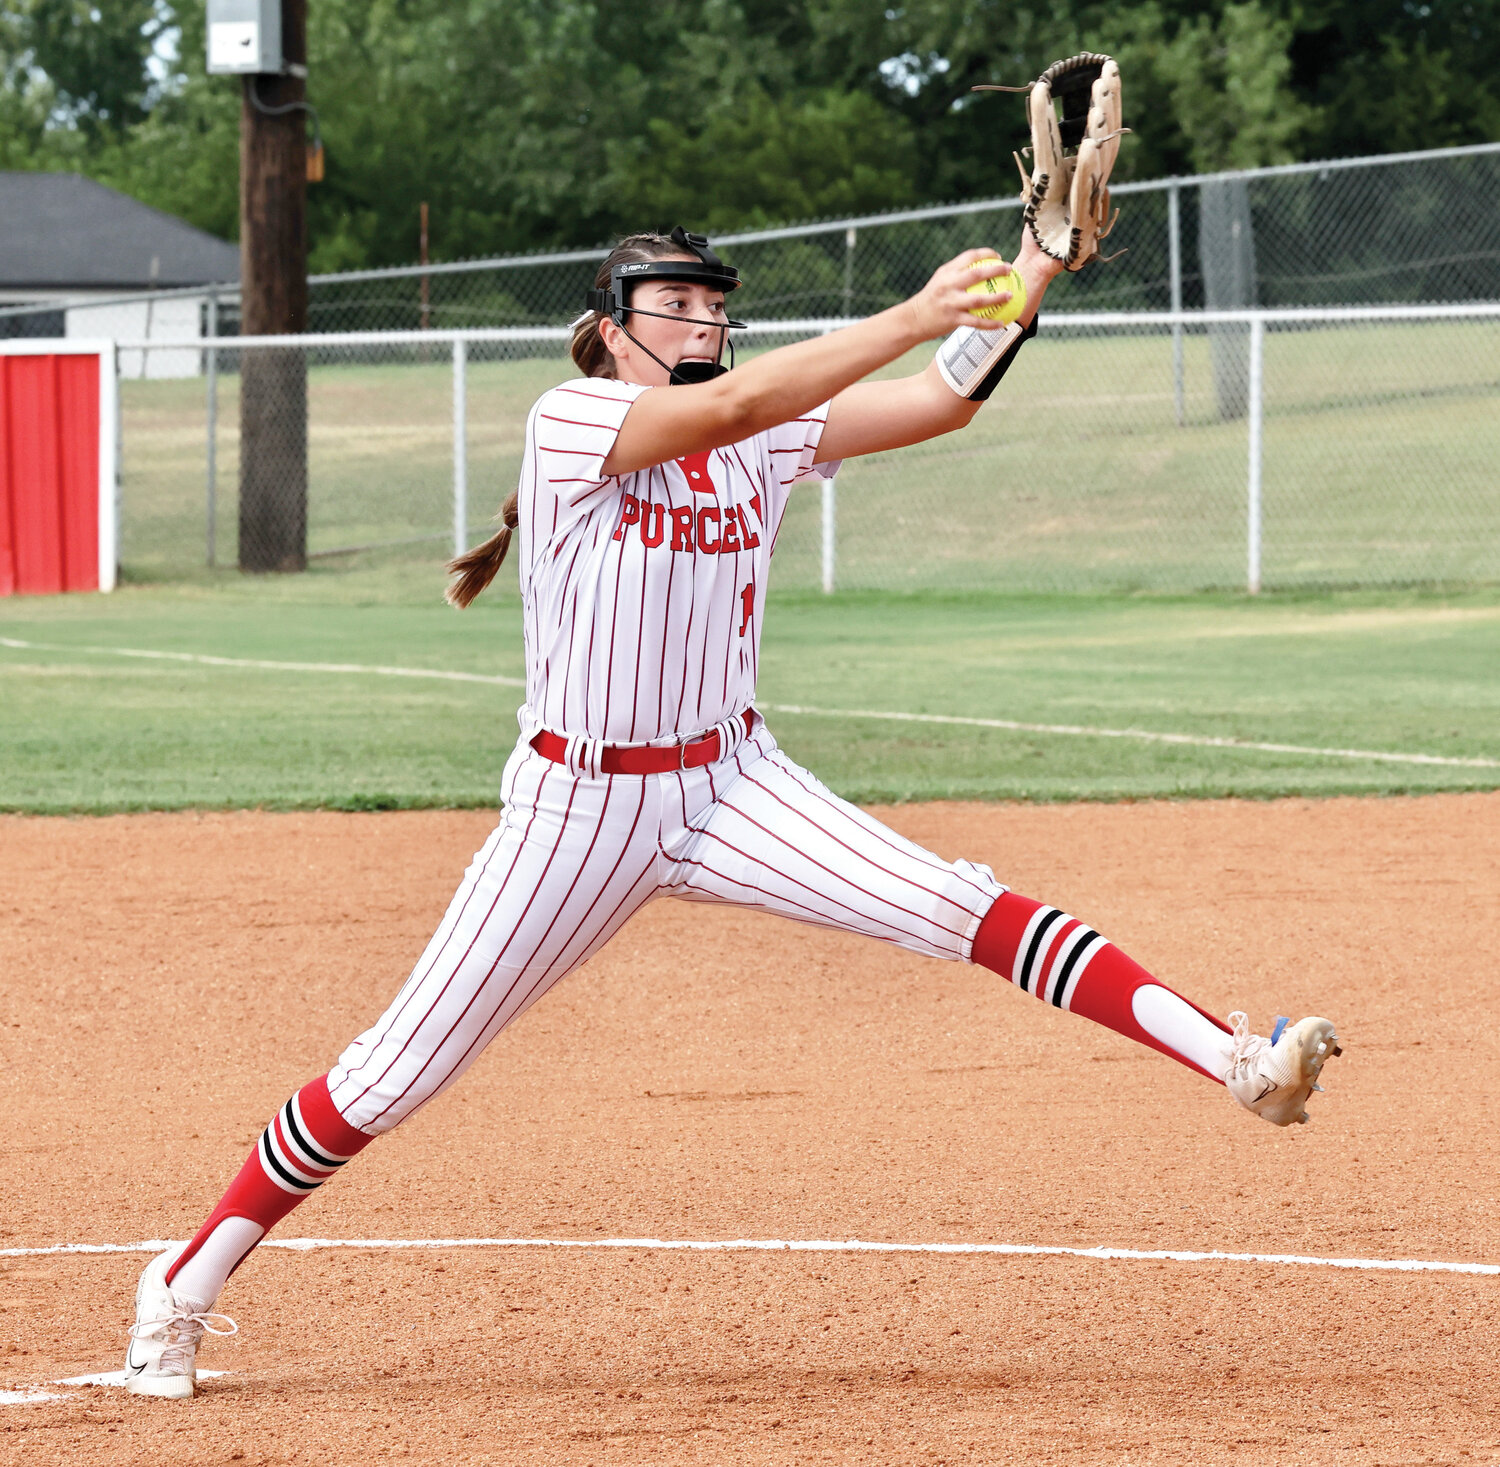 Purcell junior Ella Resendiz pitched a perfect game Monday in the Dragons’ 10-0 win over Sulphur. Resendiz struck out eight batters.